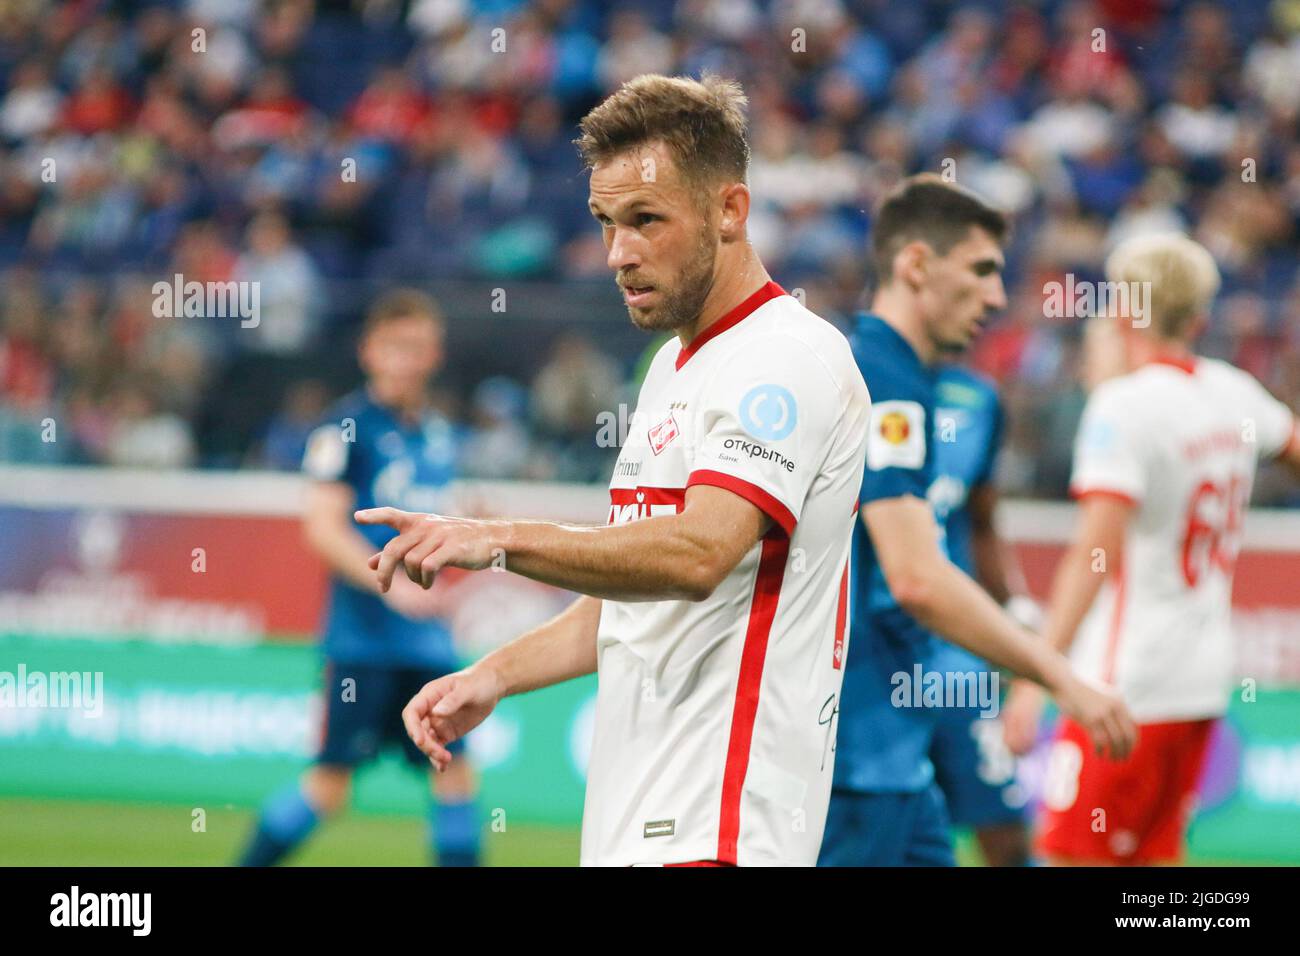 Saint Petersburg, Russia. 09th July, 2022. Maciej Rybus (No.13) of Spartak seen during the Olimpbet Russian Football Super Cup football match between Zenit Saint Petersburg and Spartak Moscow at Gazprom Arena. Final score; Zenit 4:0 Spartak. Credit: SOPA Images Limited/Alamy Live News Stock Photo